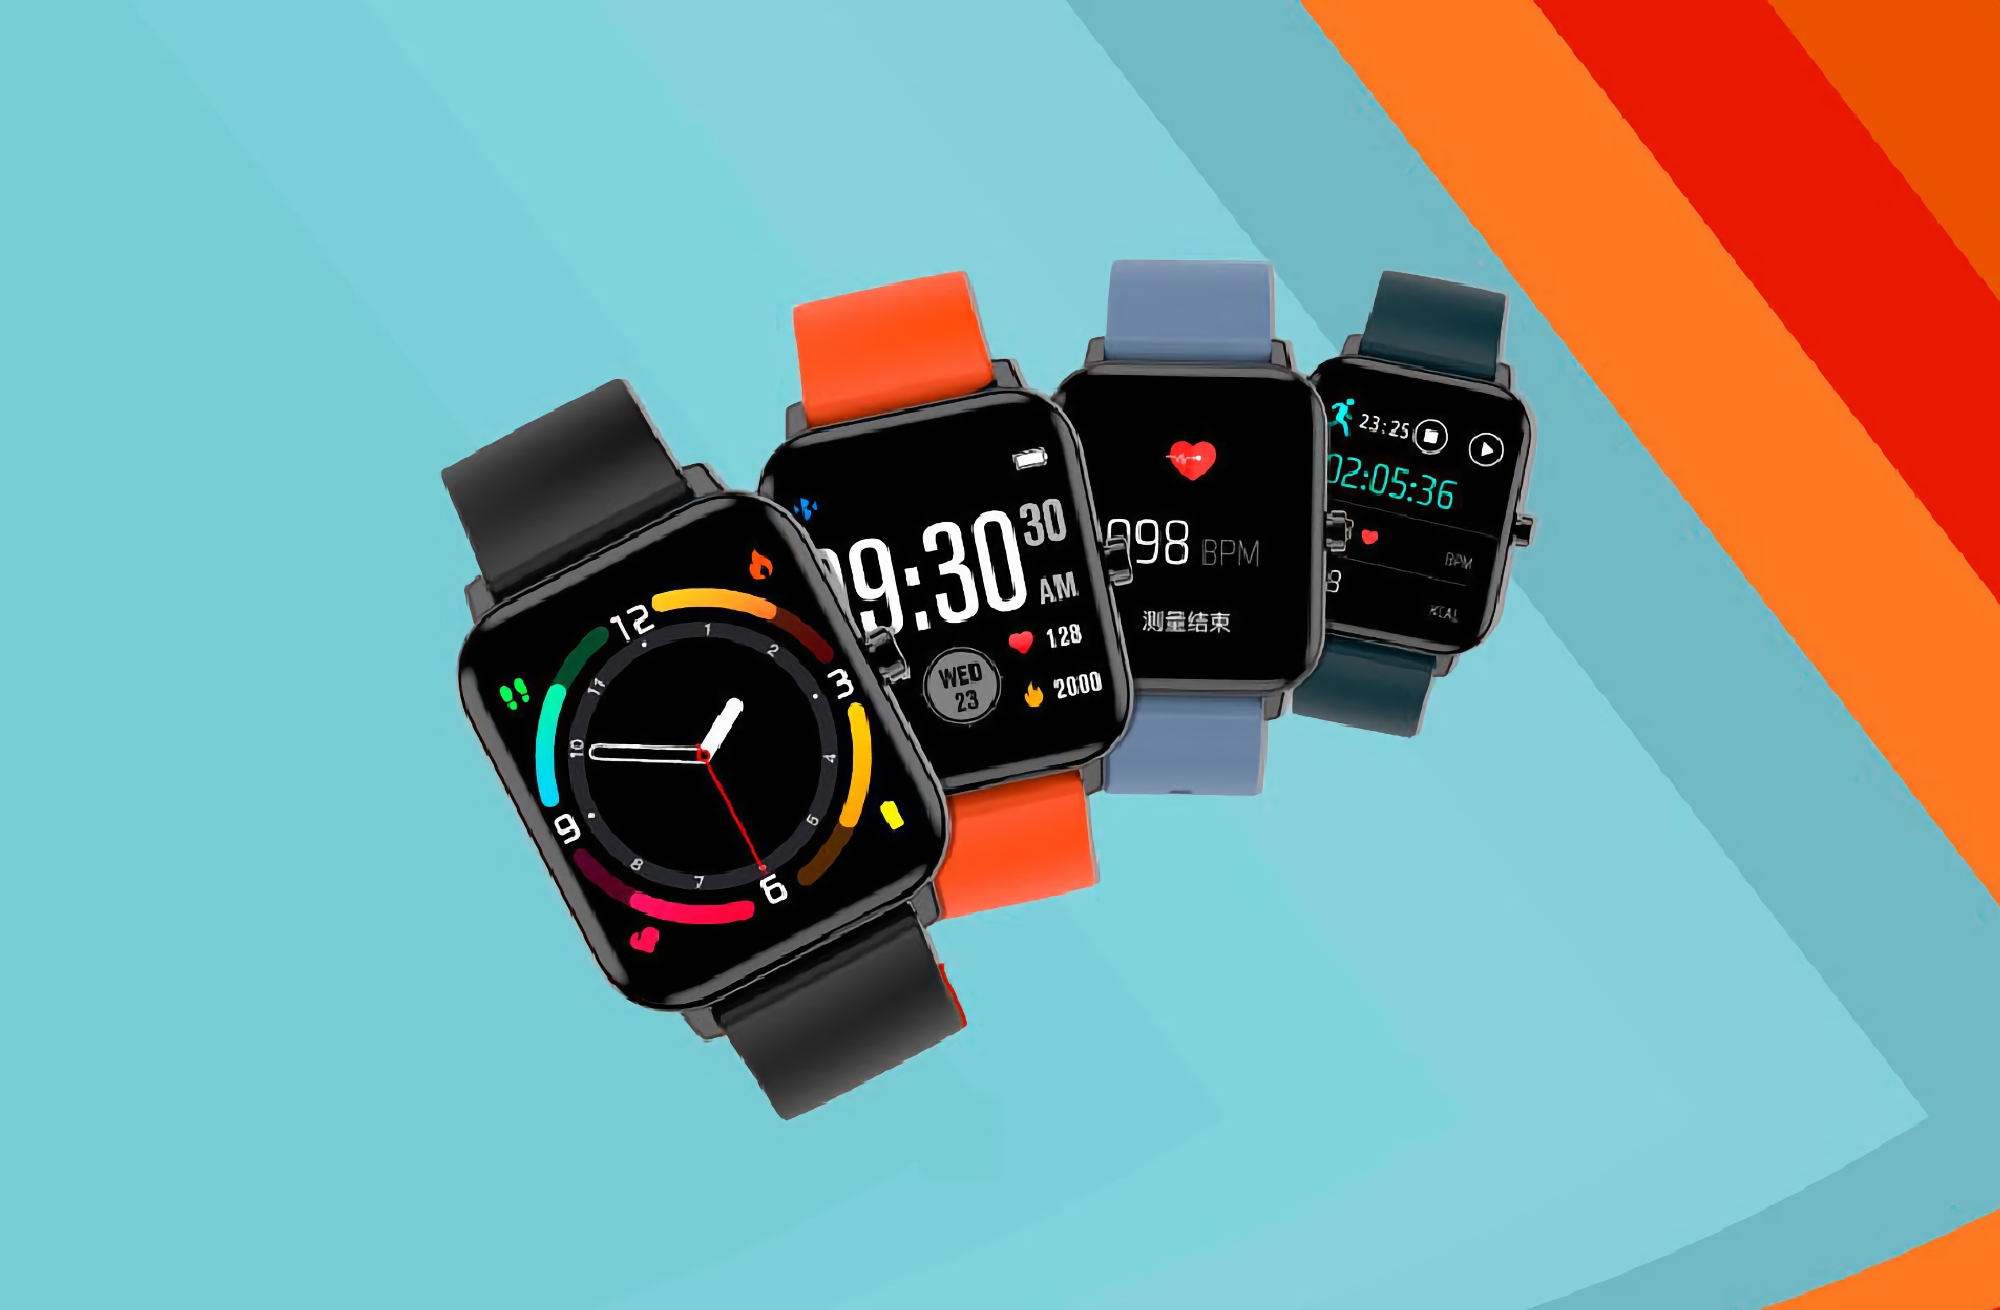 ZTE is preparing the Watch GT smartwatch: it will be unveiled together with the ZTE S30 Pro smartphone